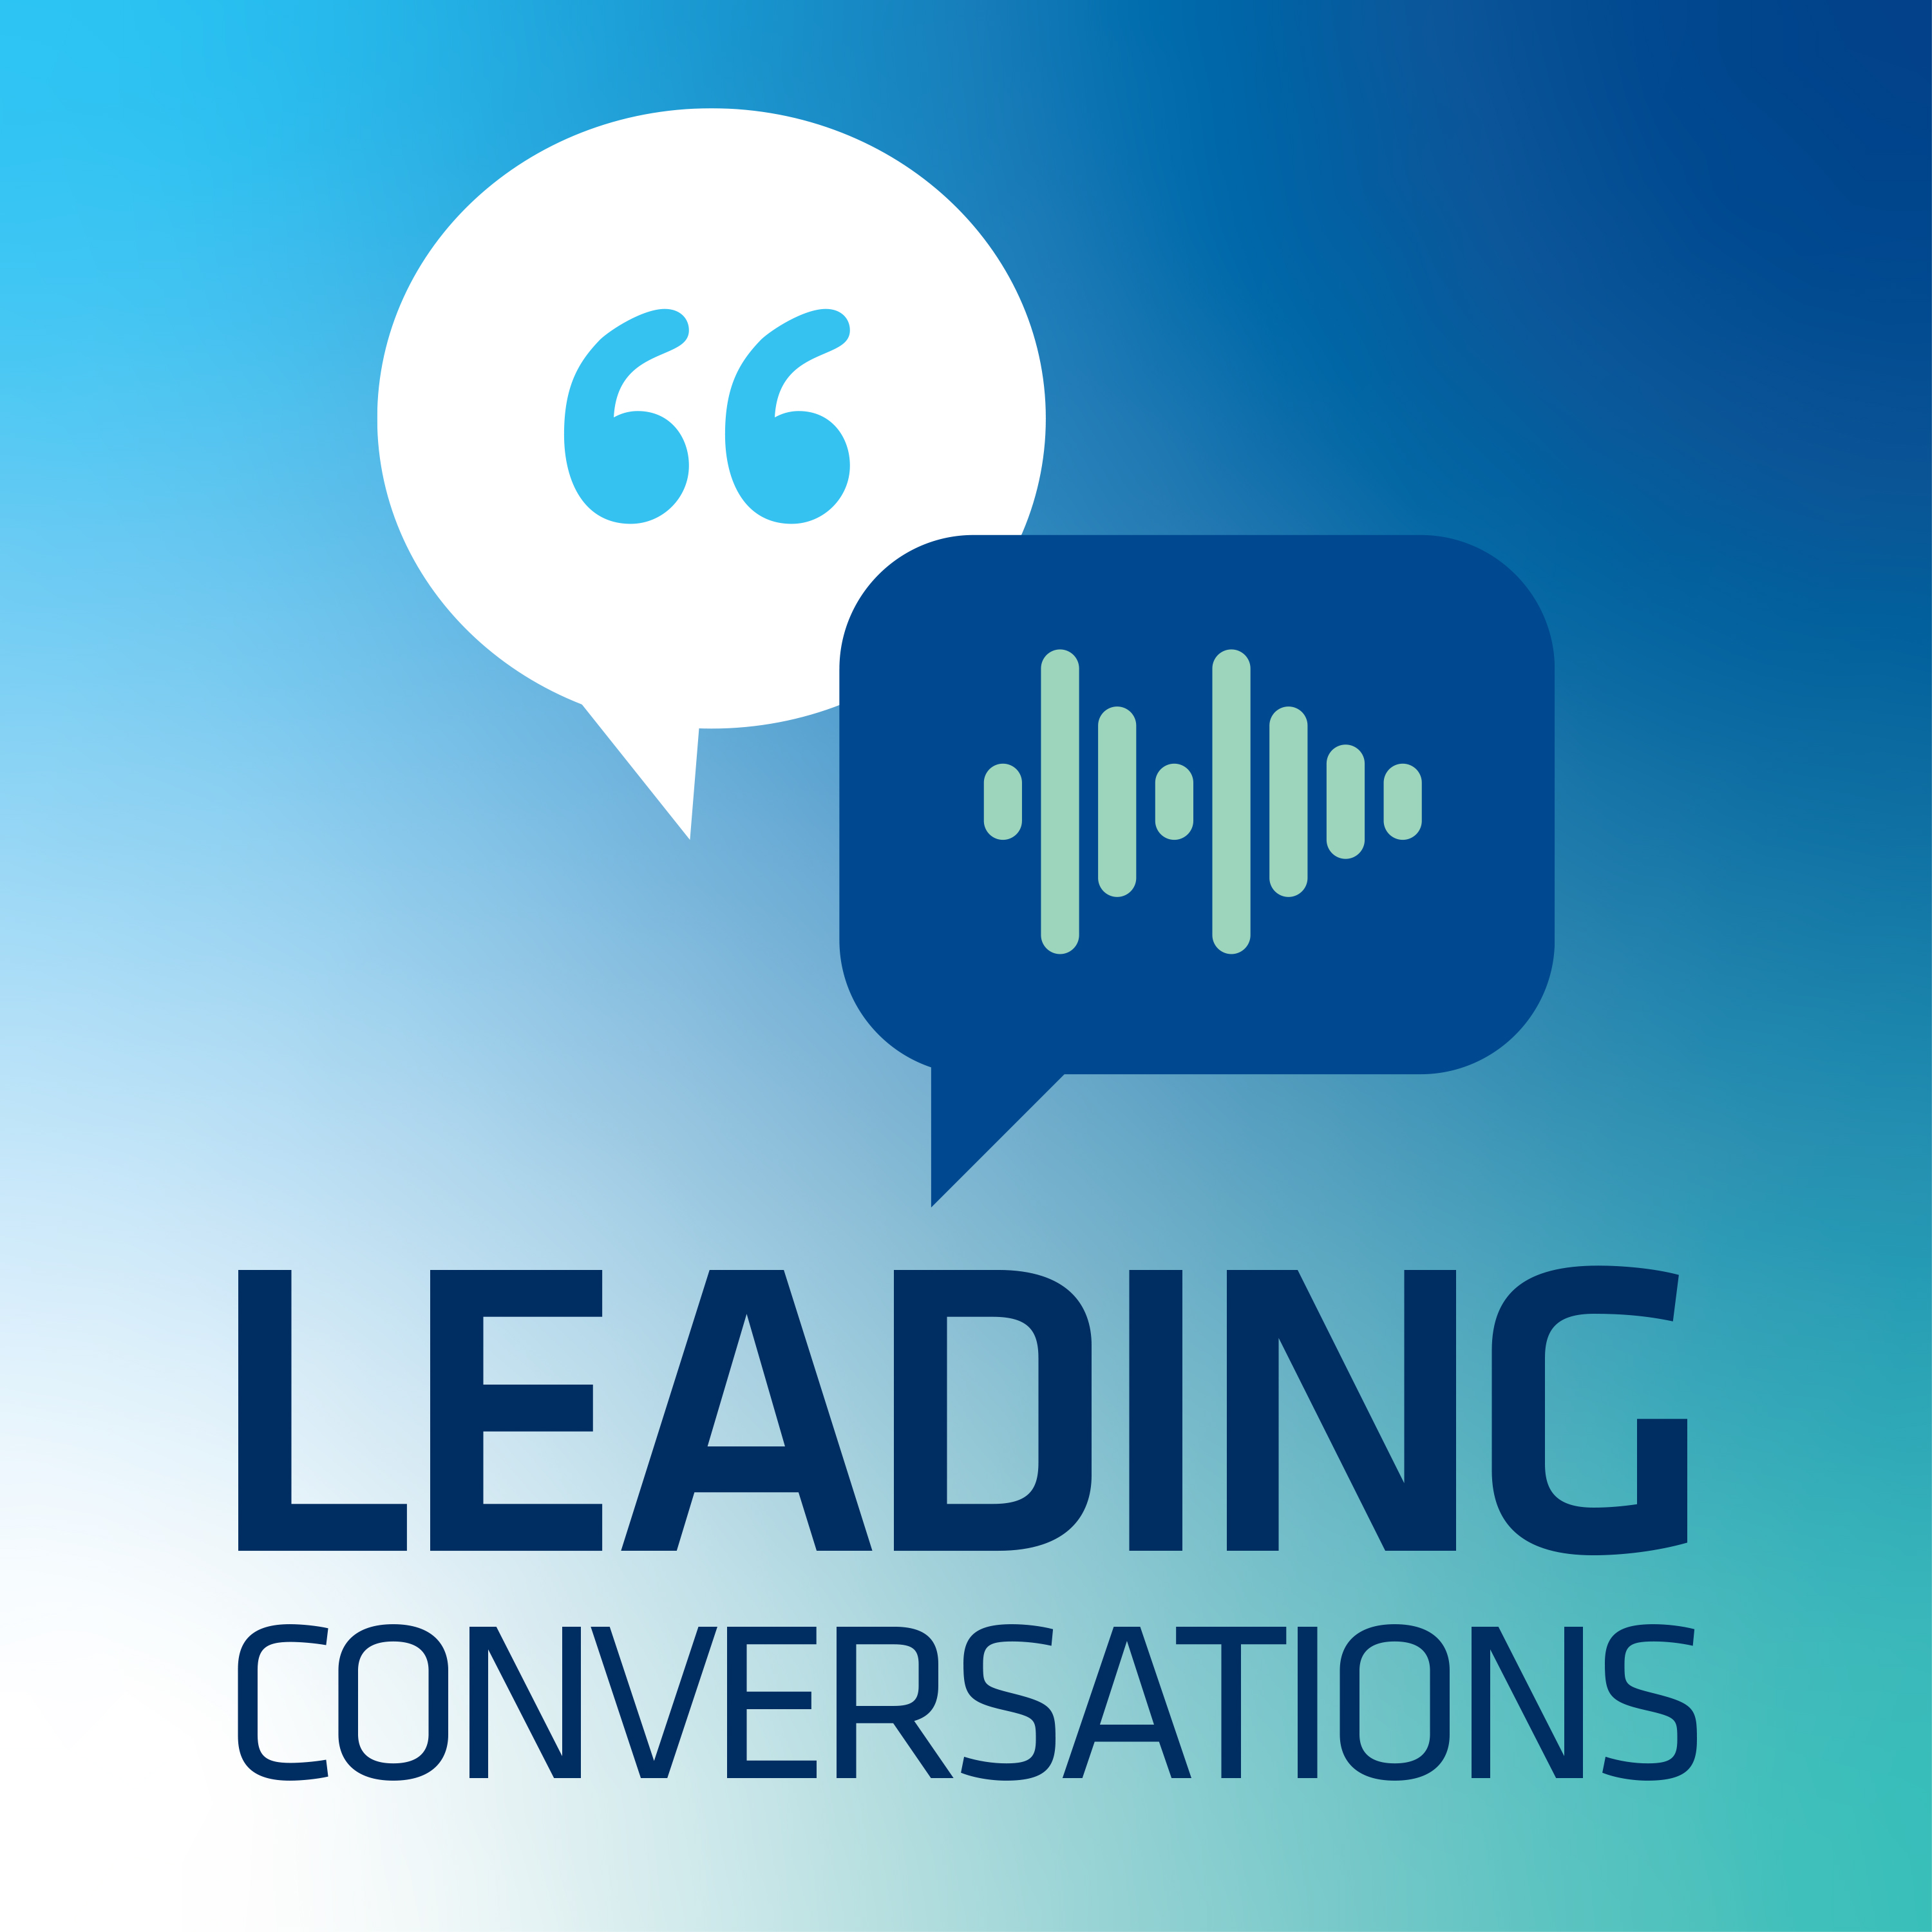 What's New for Leading Conversations, Season 3?